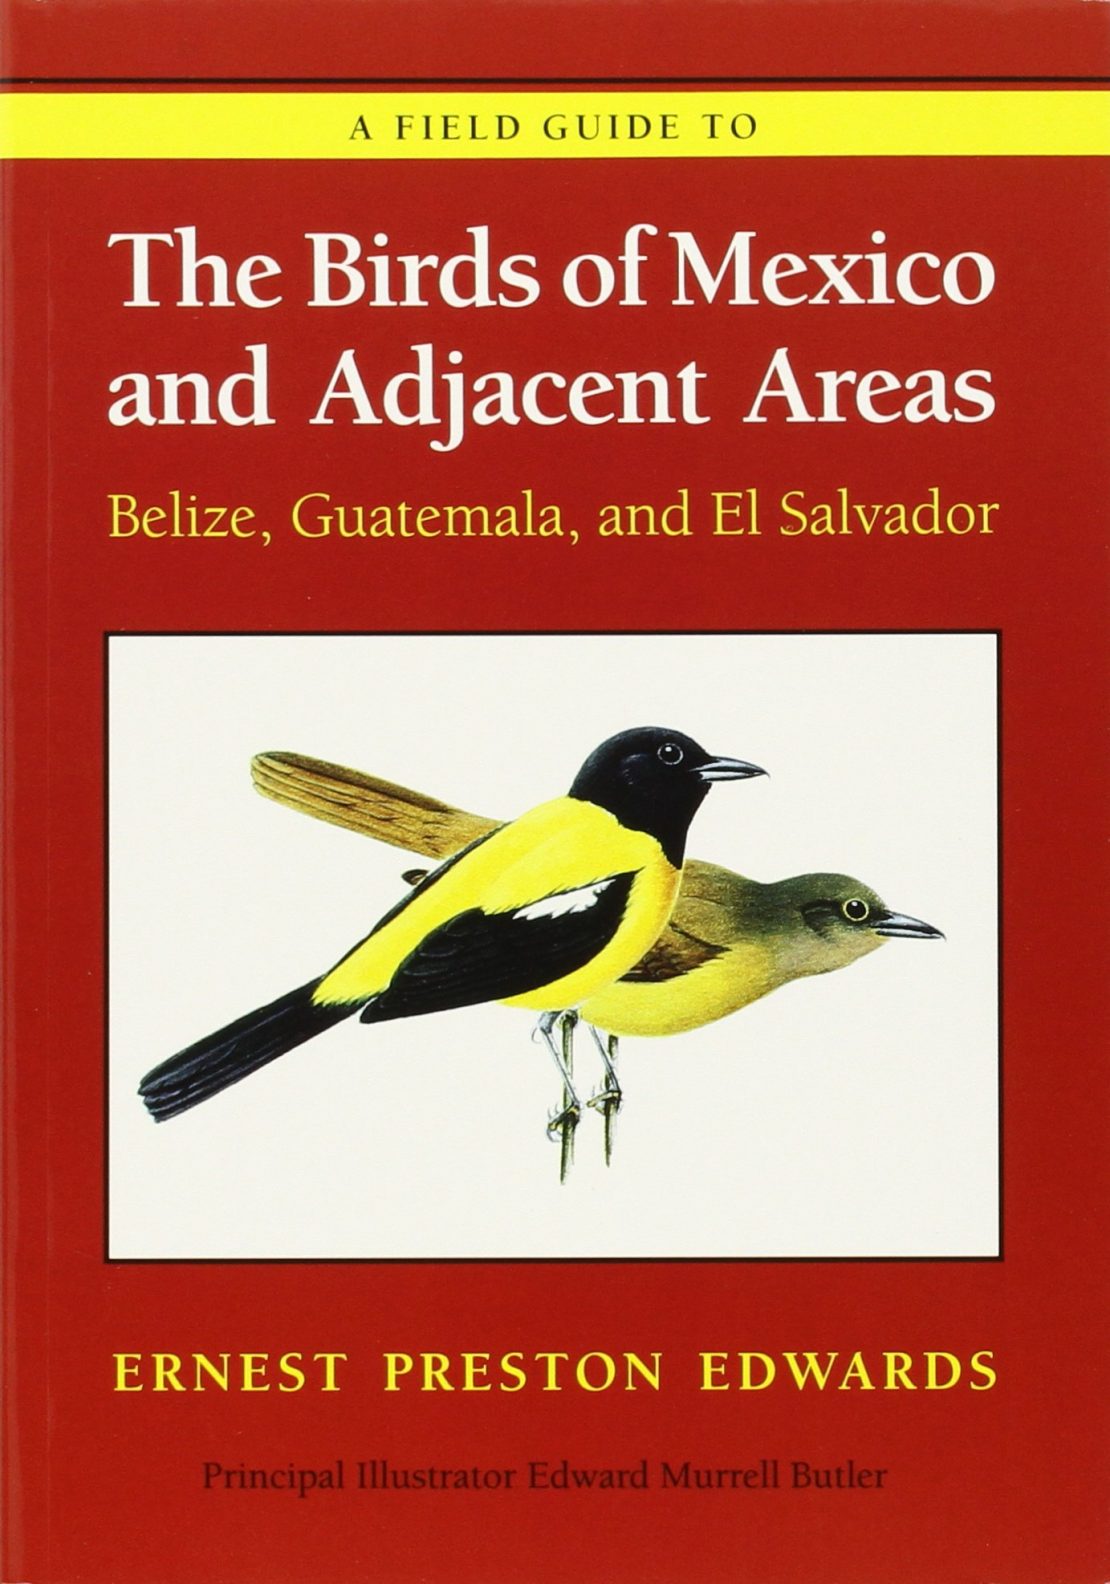 A Field Guide to the Birds of Mexico and Adjacent Areas: Belize, Guatemala, and El Salvador, Third Edition (Corrie Herring Hooks)